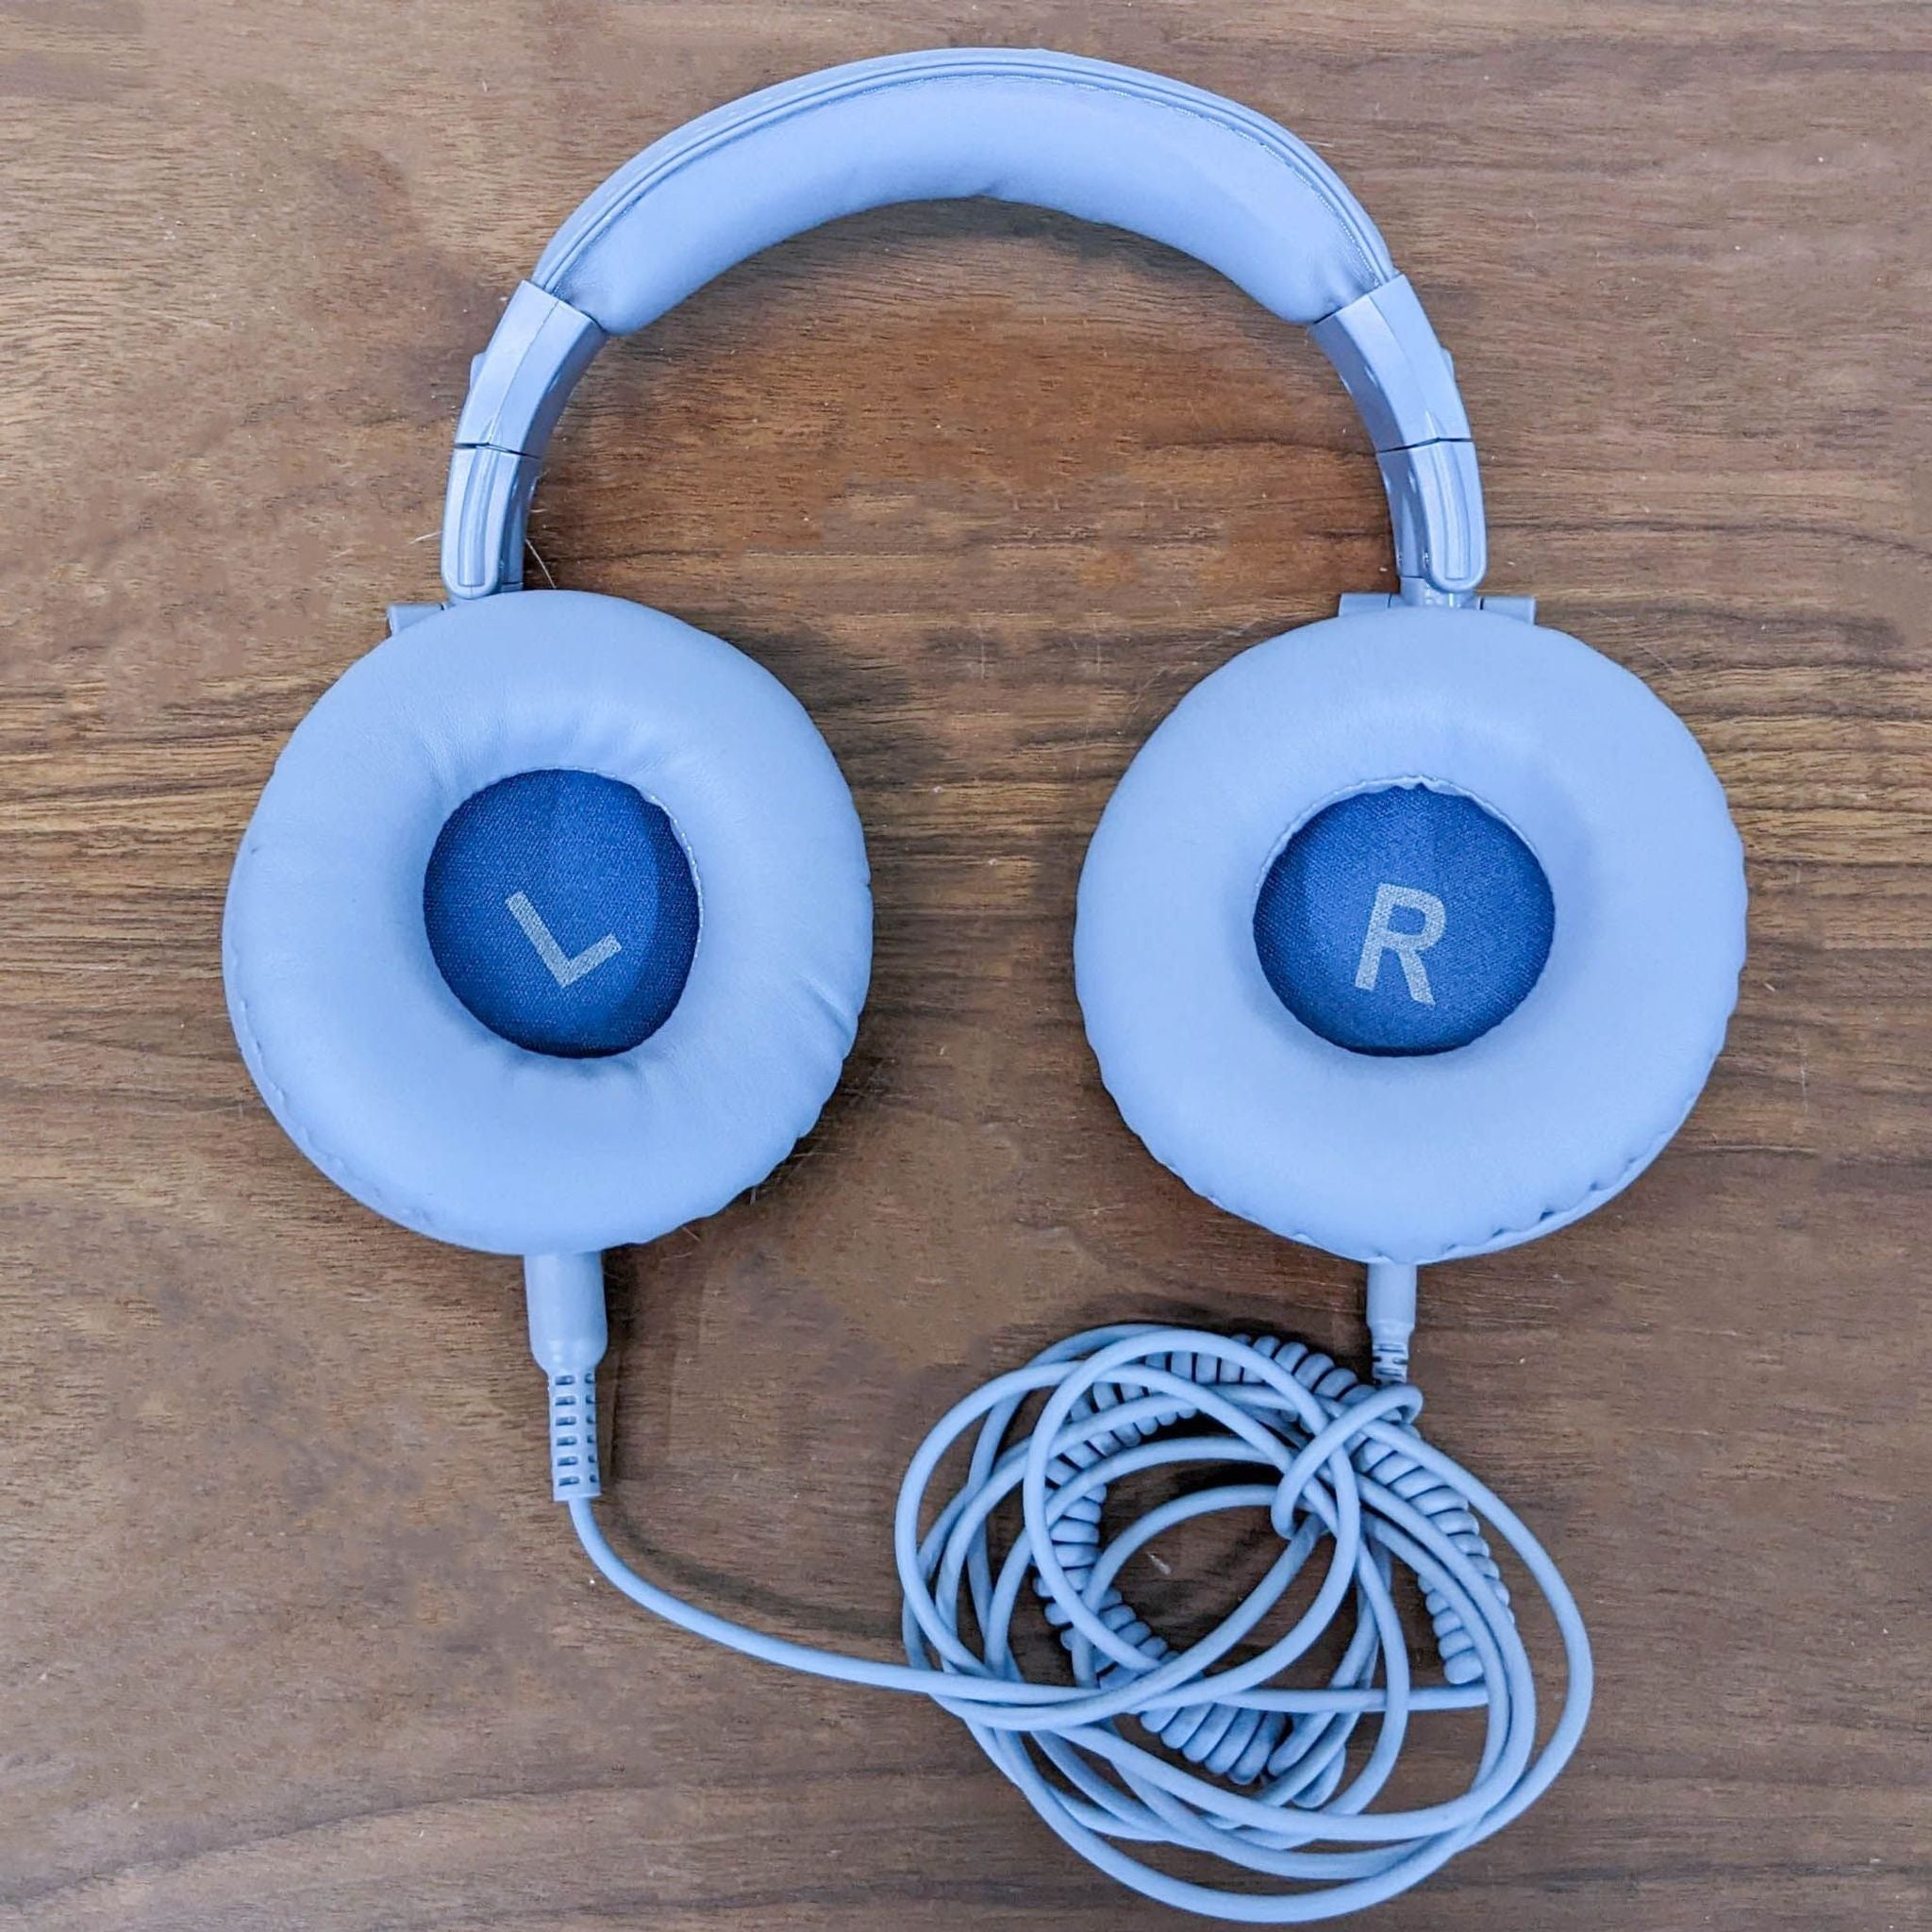 OneOdio headphones with blue "L" and "R" indicators on ear cups, highlighting intuitive design, with coiled cable.